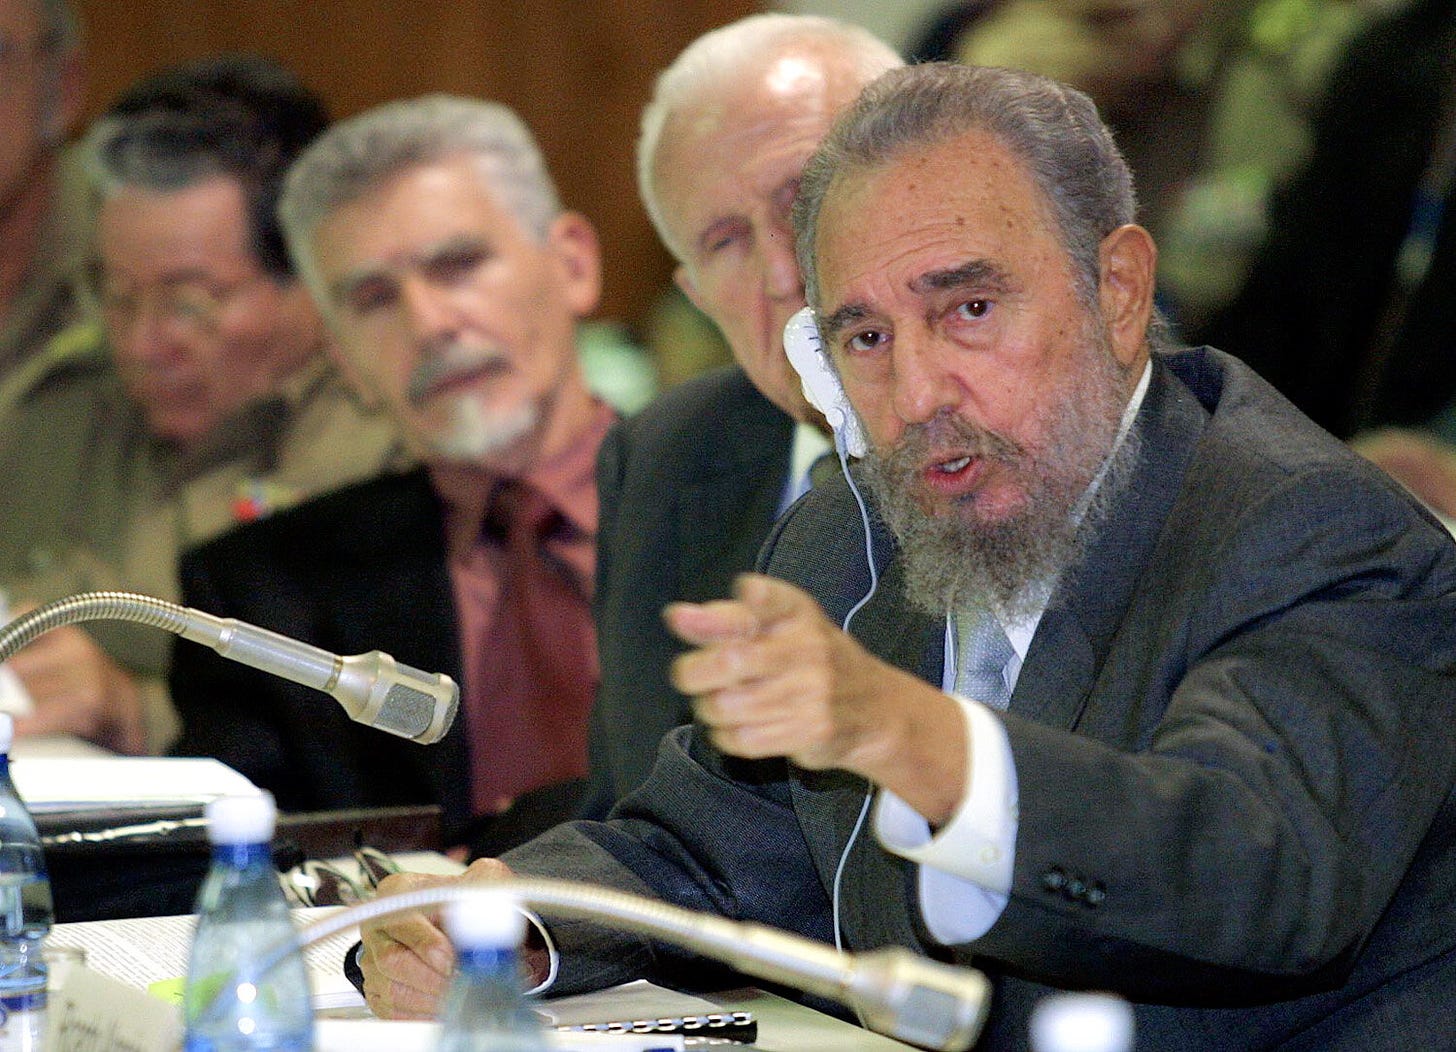  Fidel Castro, Cubas Head of State and Party, gives a speech,  during an international conference on occasion of the 40th anniversary of the Cuba-Crisis, in Havana, Cuba, on October 12, 2002.  